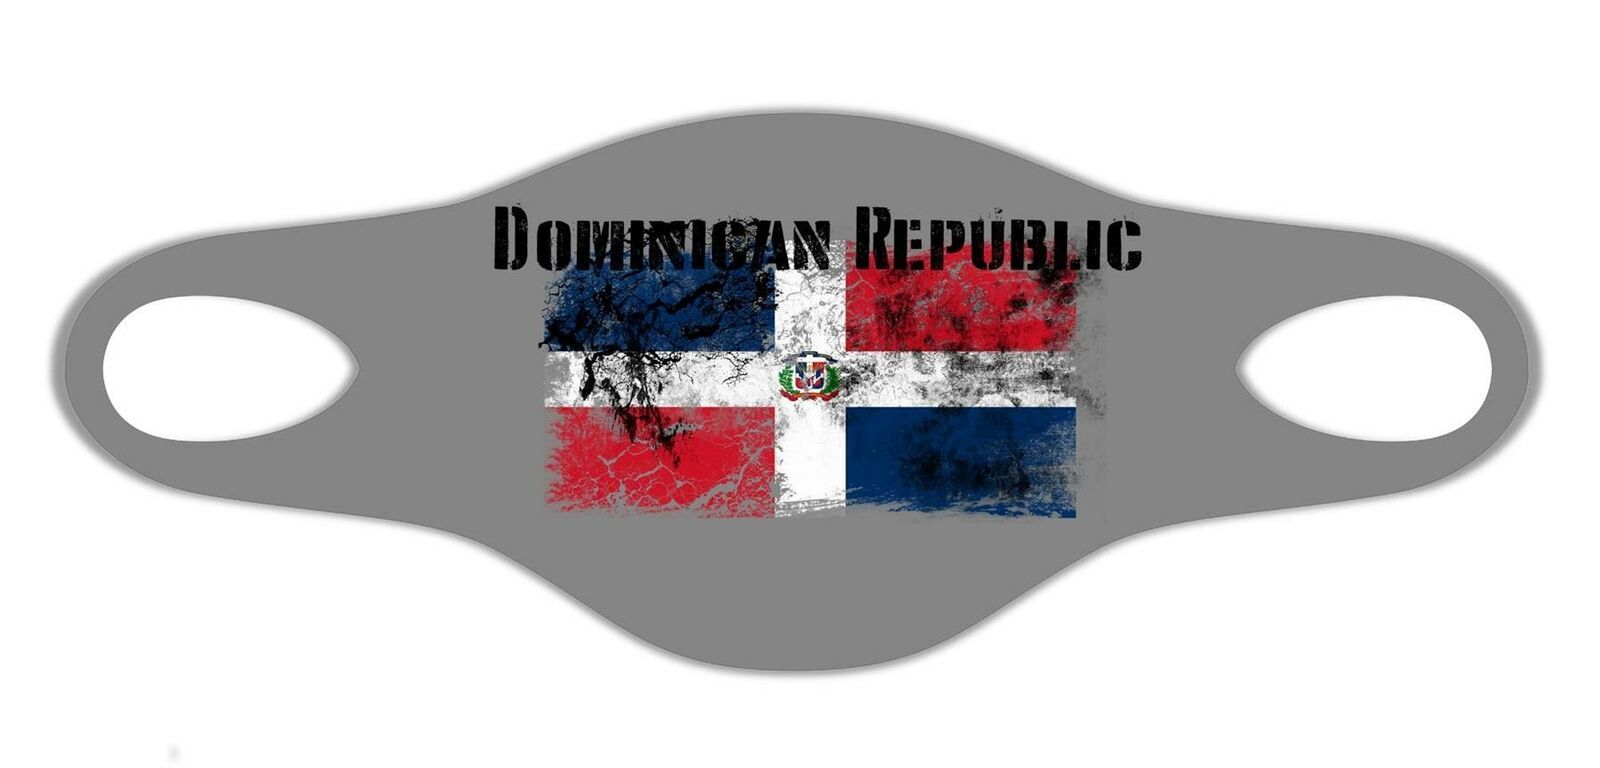 Dominican Republic National Flag Face Mask Protective Reusable washable Breath